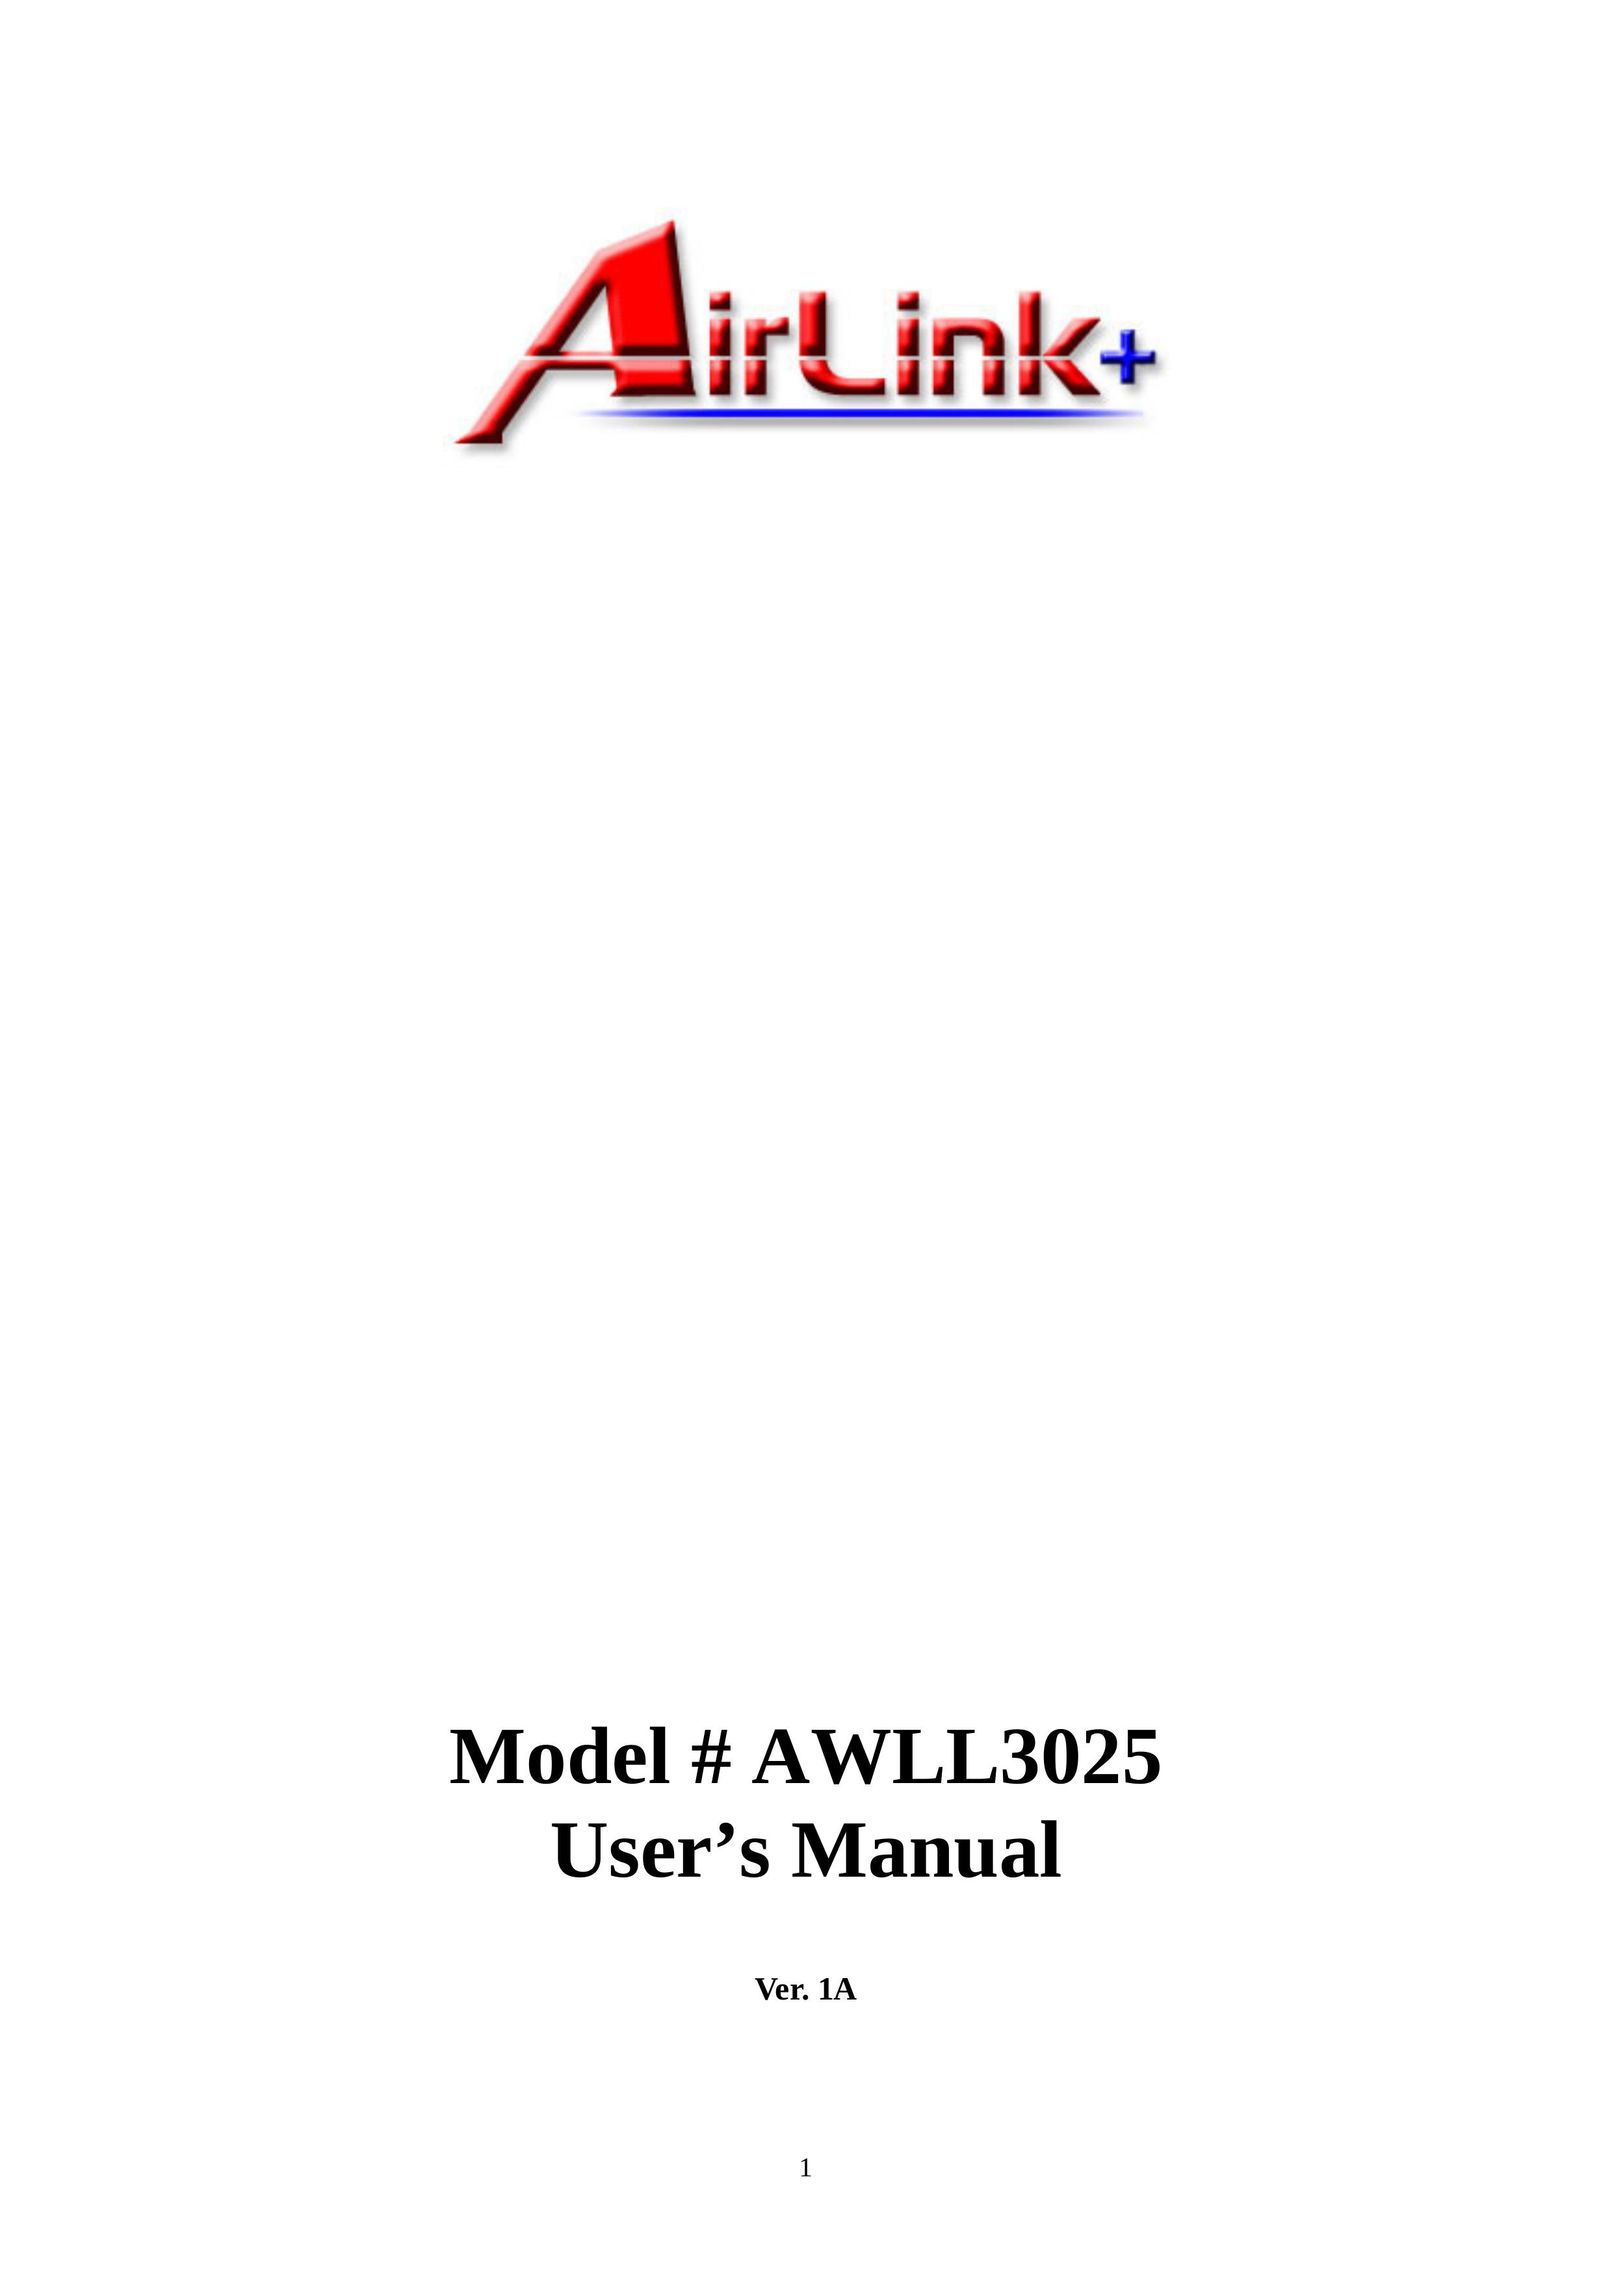 Airlink AWLL3025 Network Card User Manual